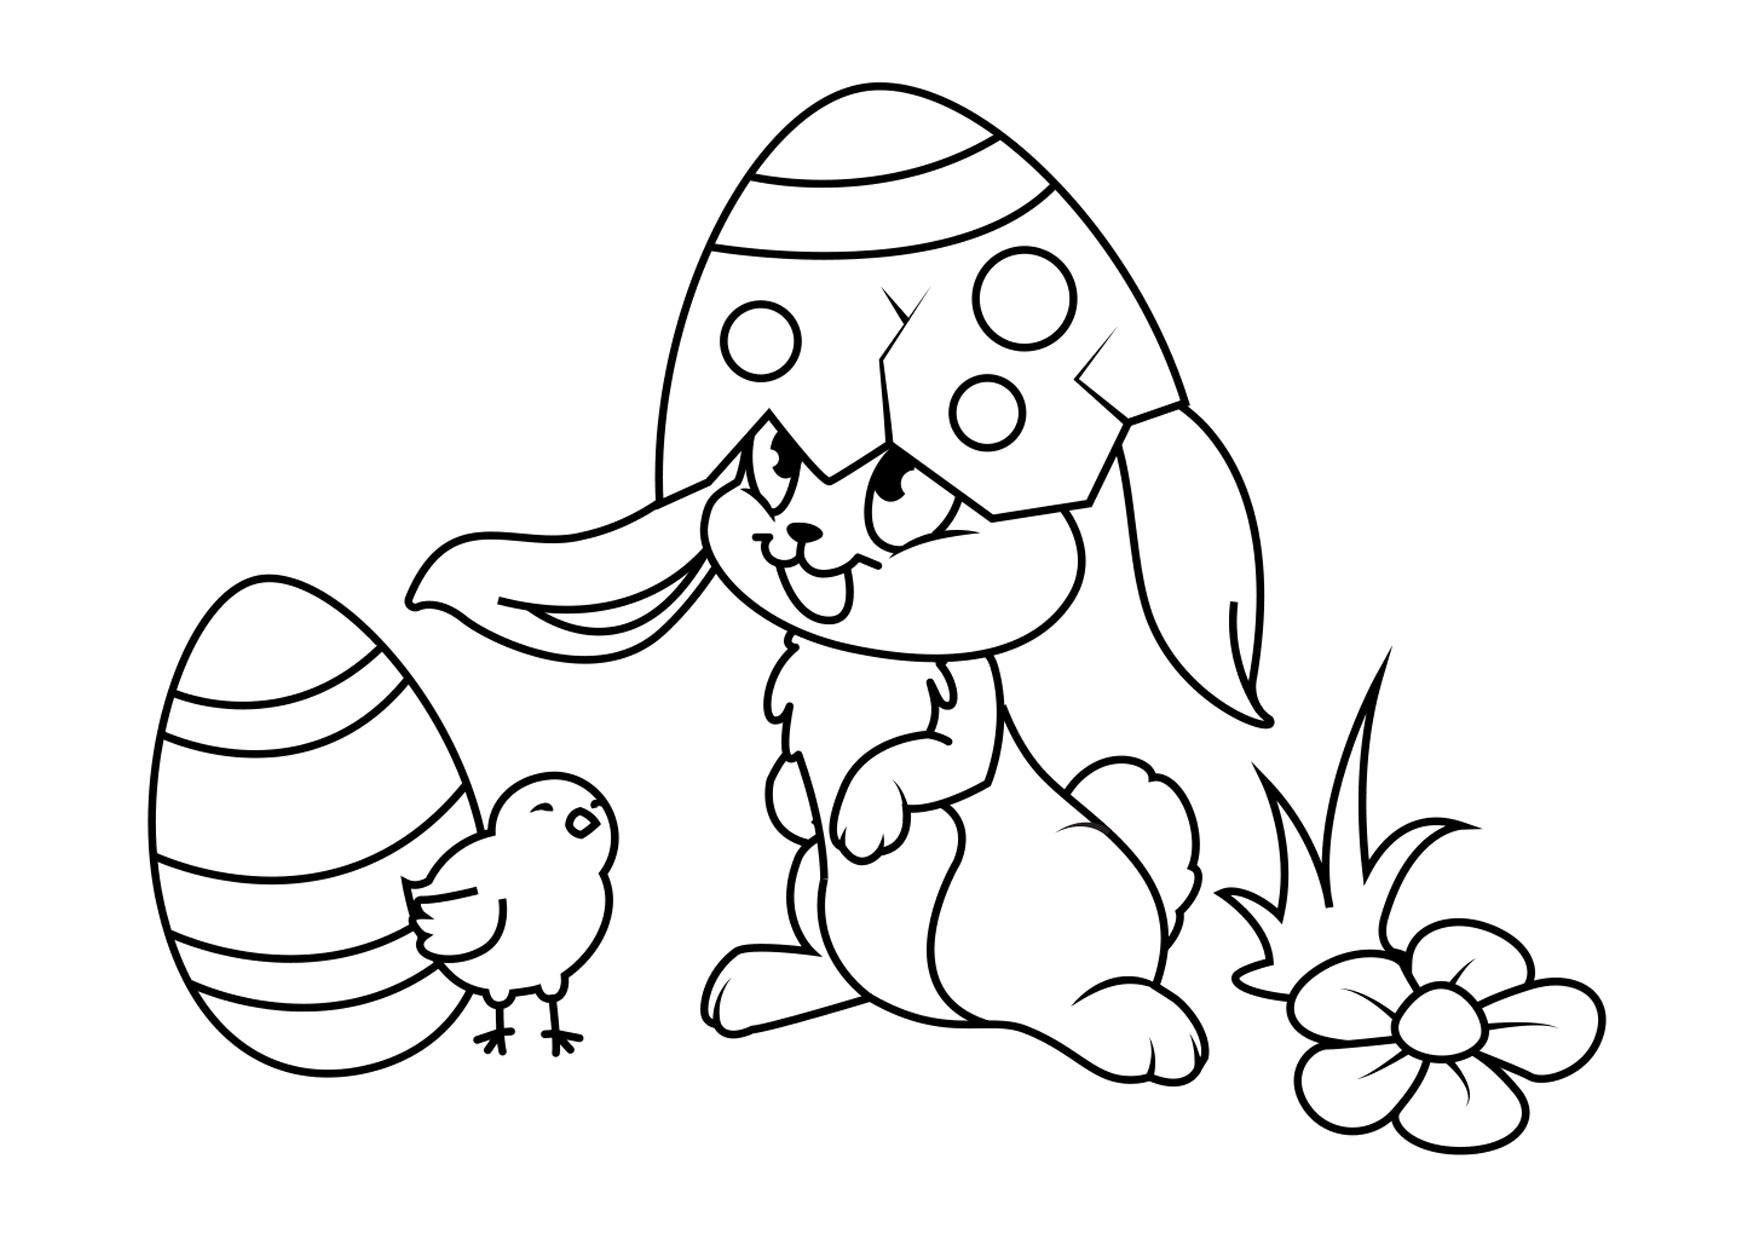 Coloring page Easter bunny with chick